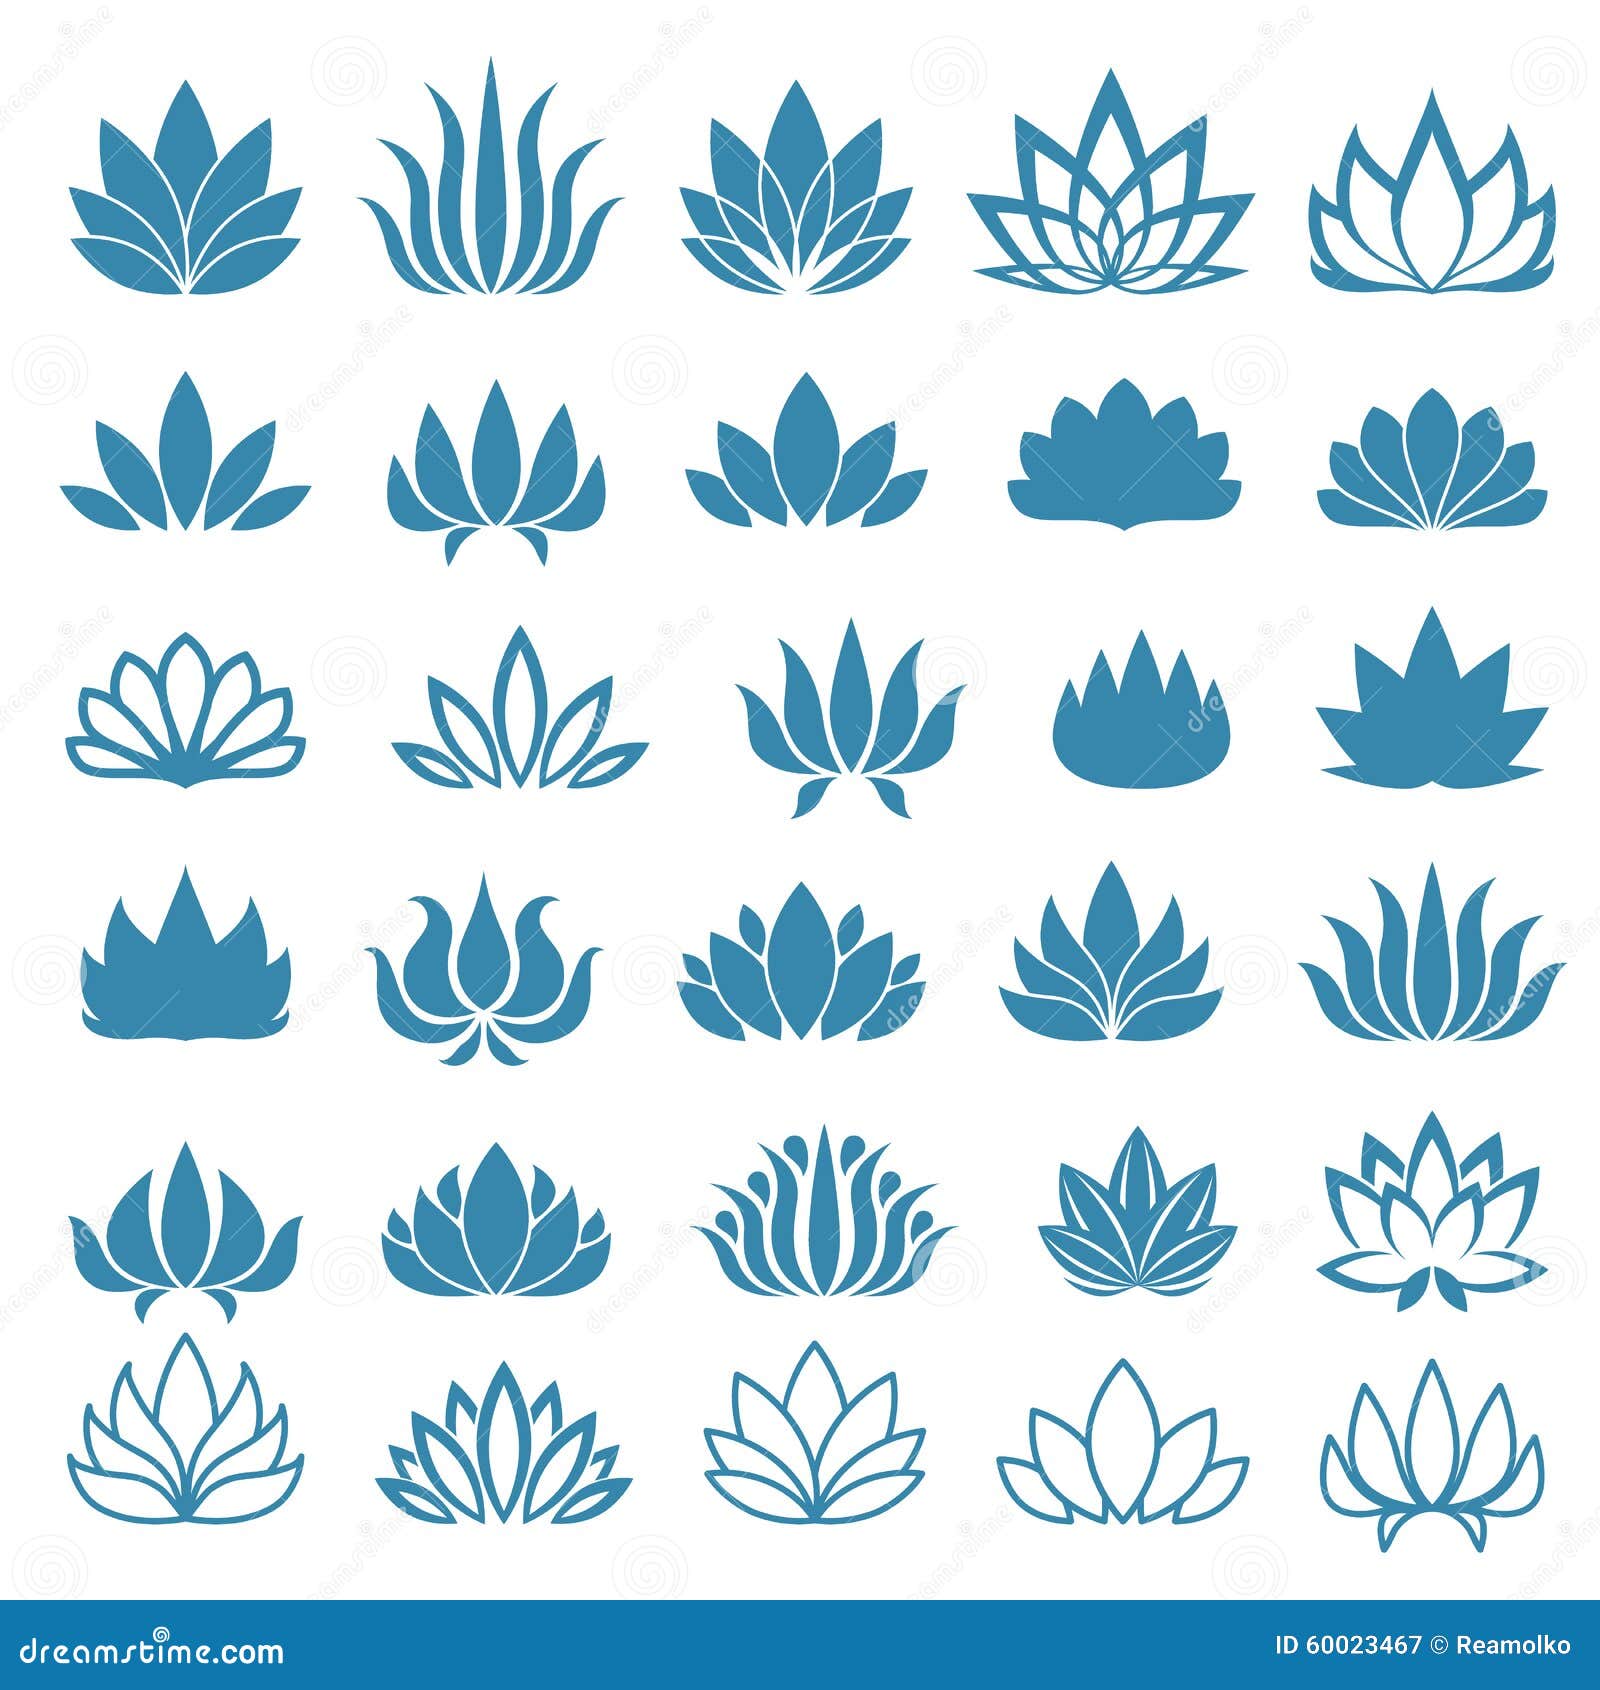 lotus flower assorted icons set